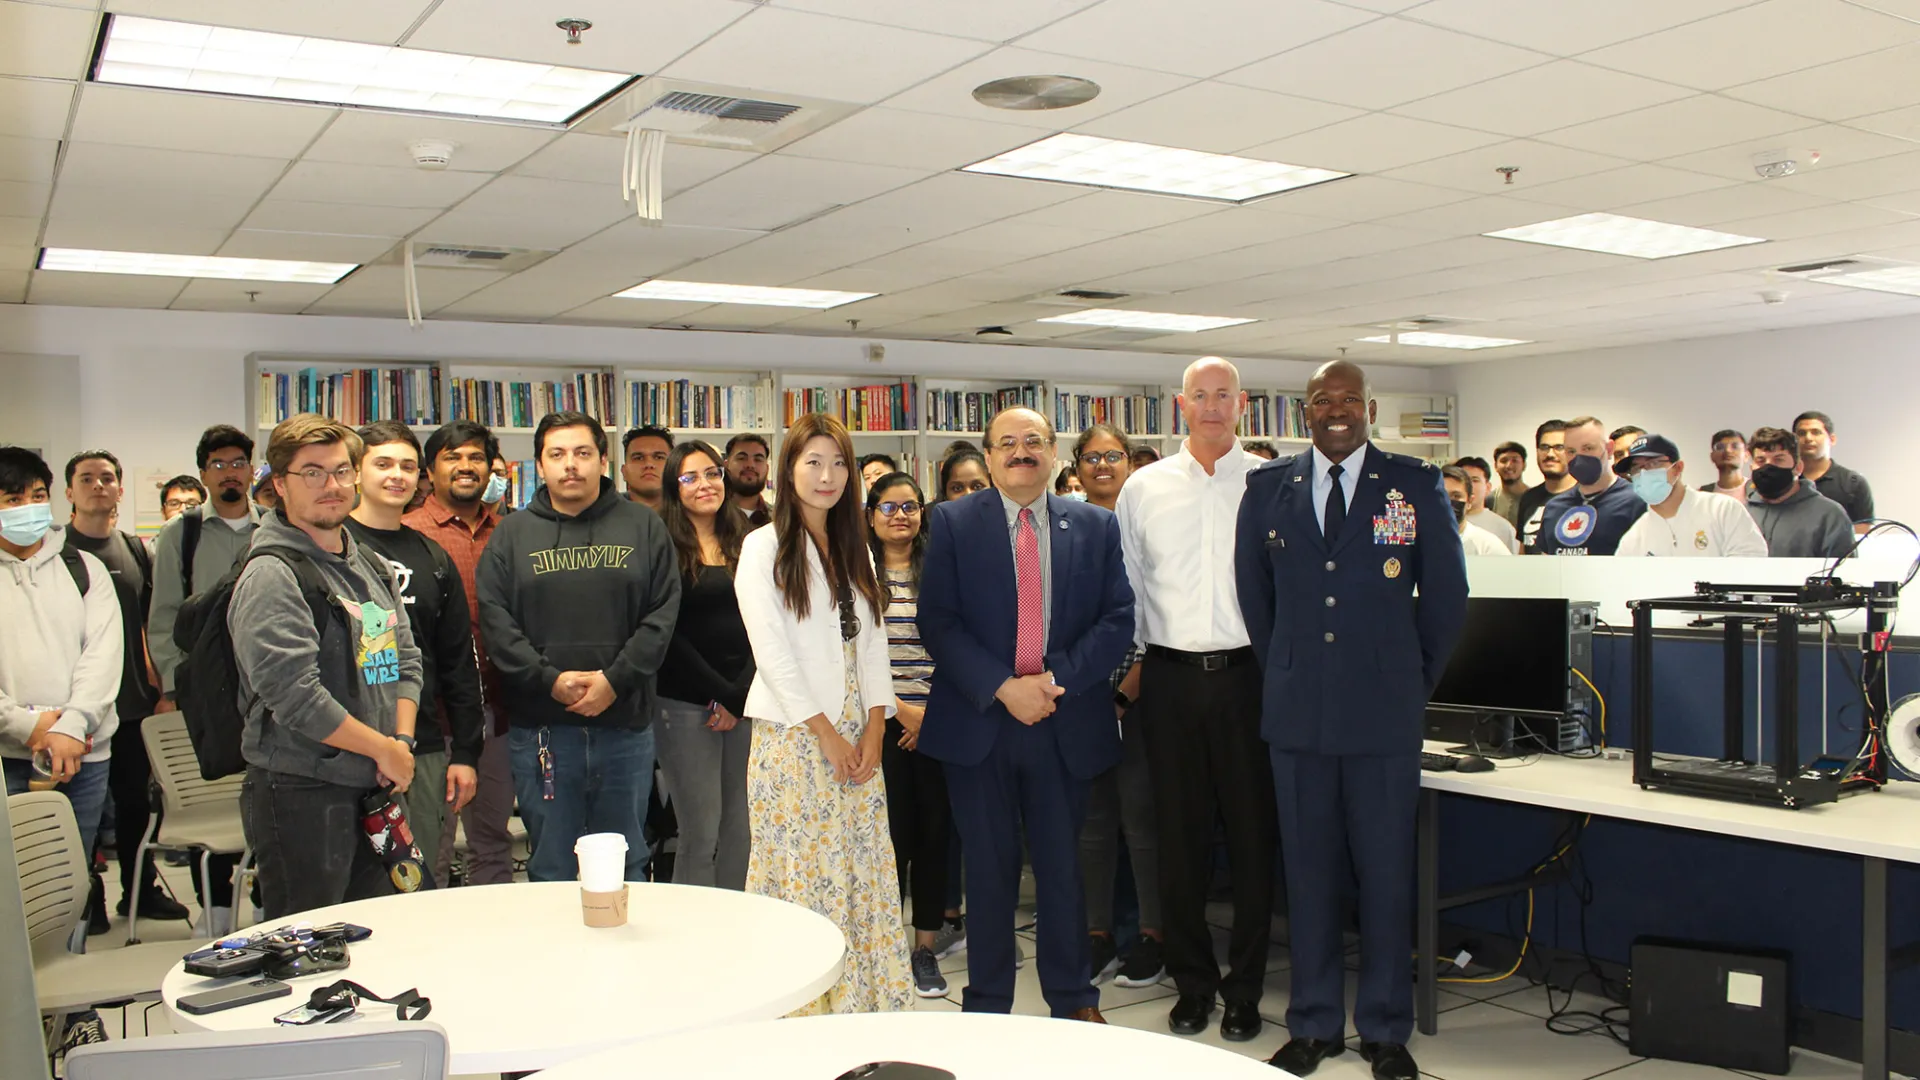 Beginning at center left, Jennifer Jin (in the white jacket), assistant professor, School of Computer Science and Engineering; Khalil Dajani, director and professor, School of Computer Science and Engineering; Stephan Ewart, U.S. Air Force Head of Engineering Squadron; Air Force Col. Ahave Brown Jr., commander of 412 MXG Squadron; with students who attended an Oct. 26 event at CSUSB.